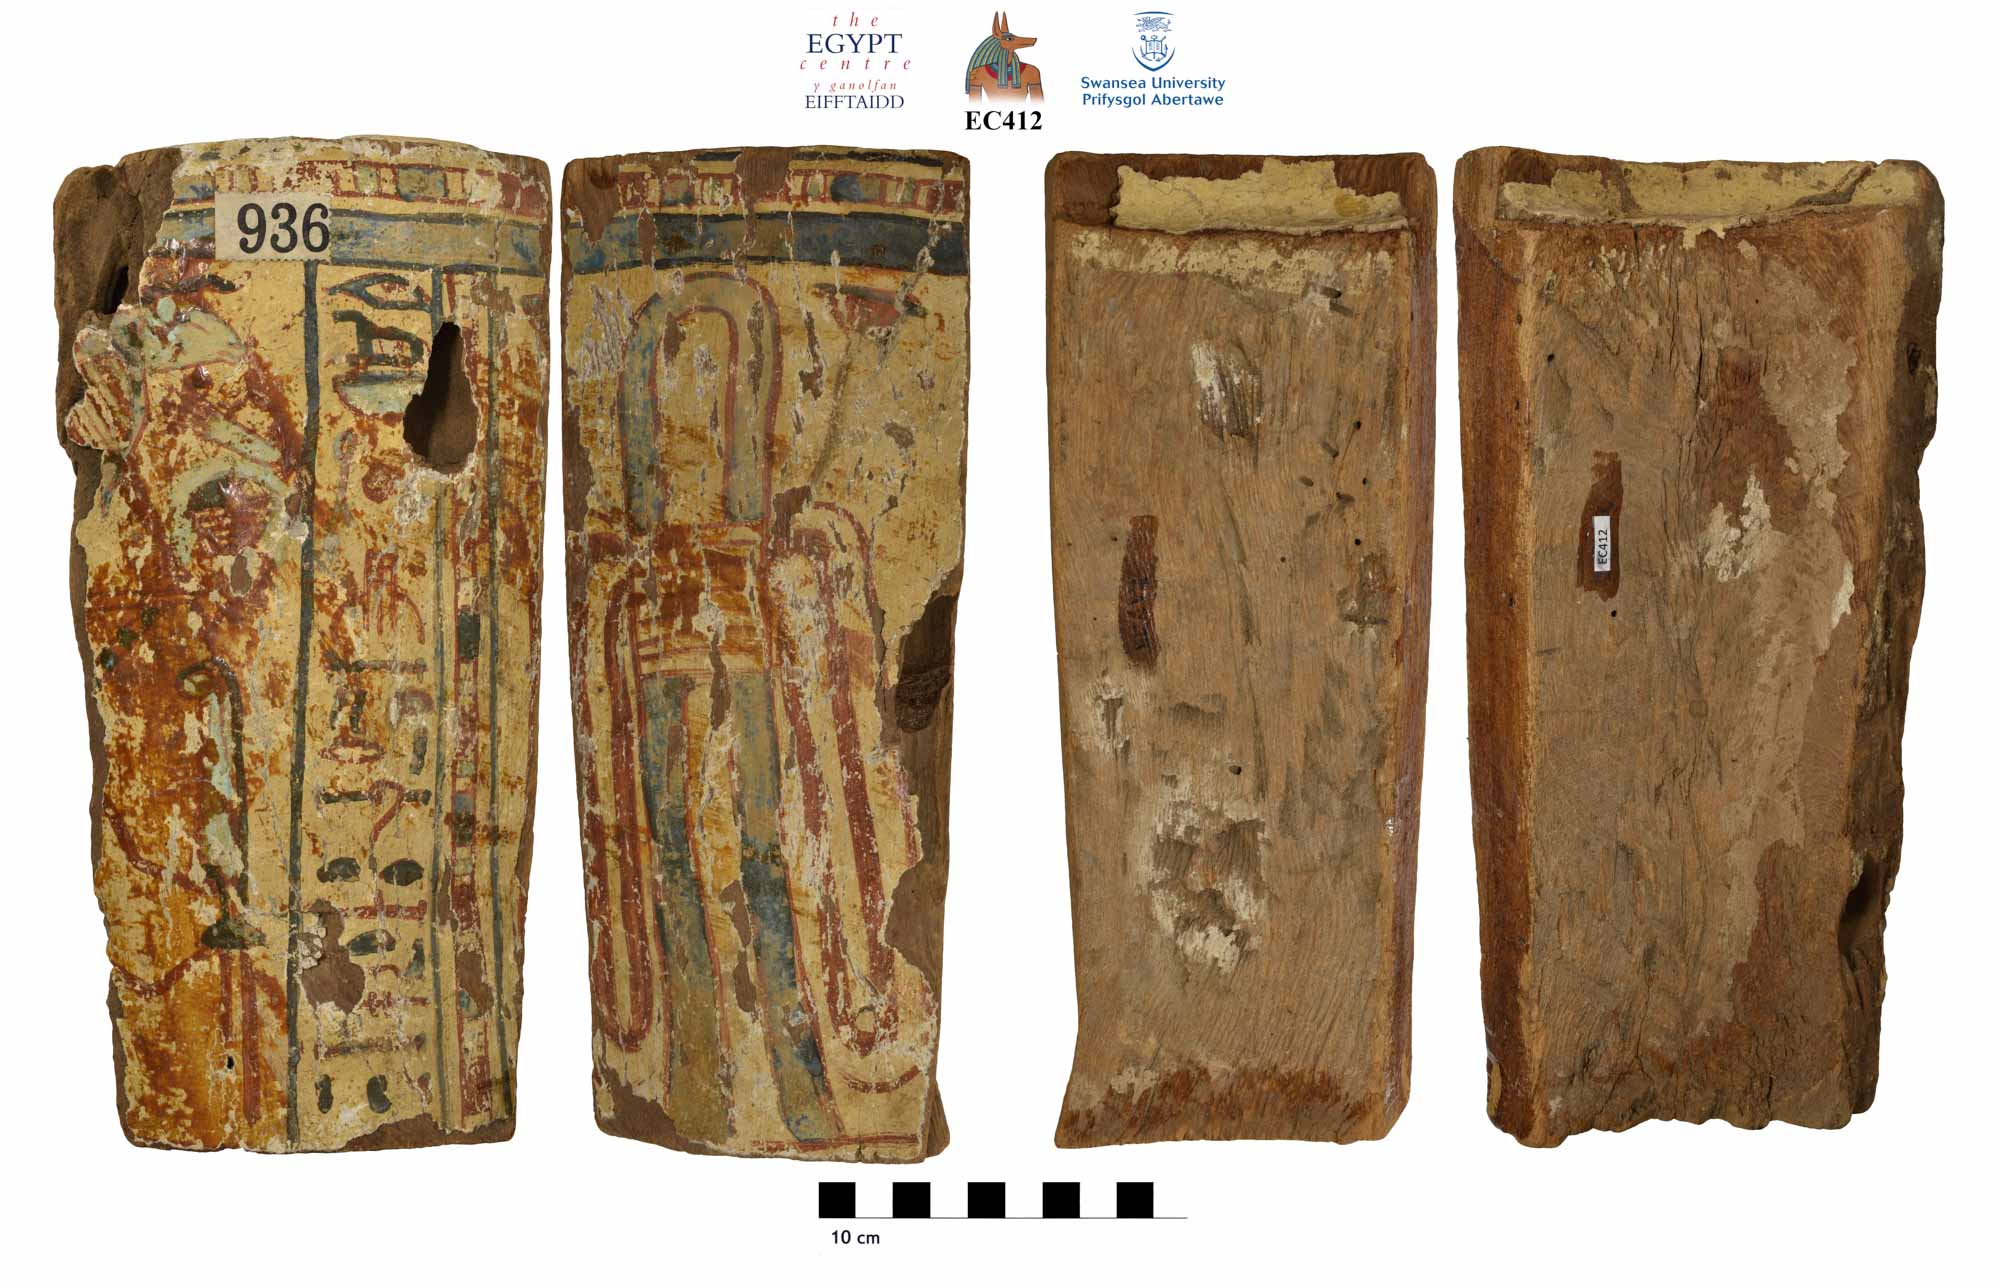 Image for: Fragments of a coffin